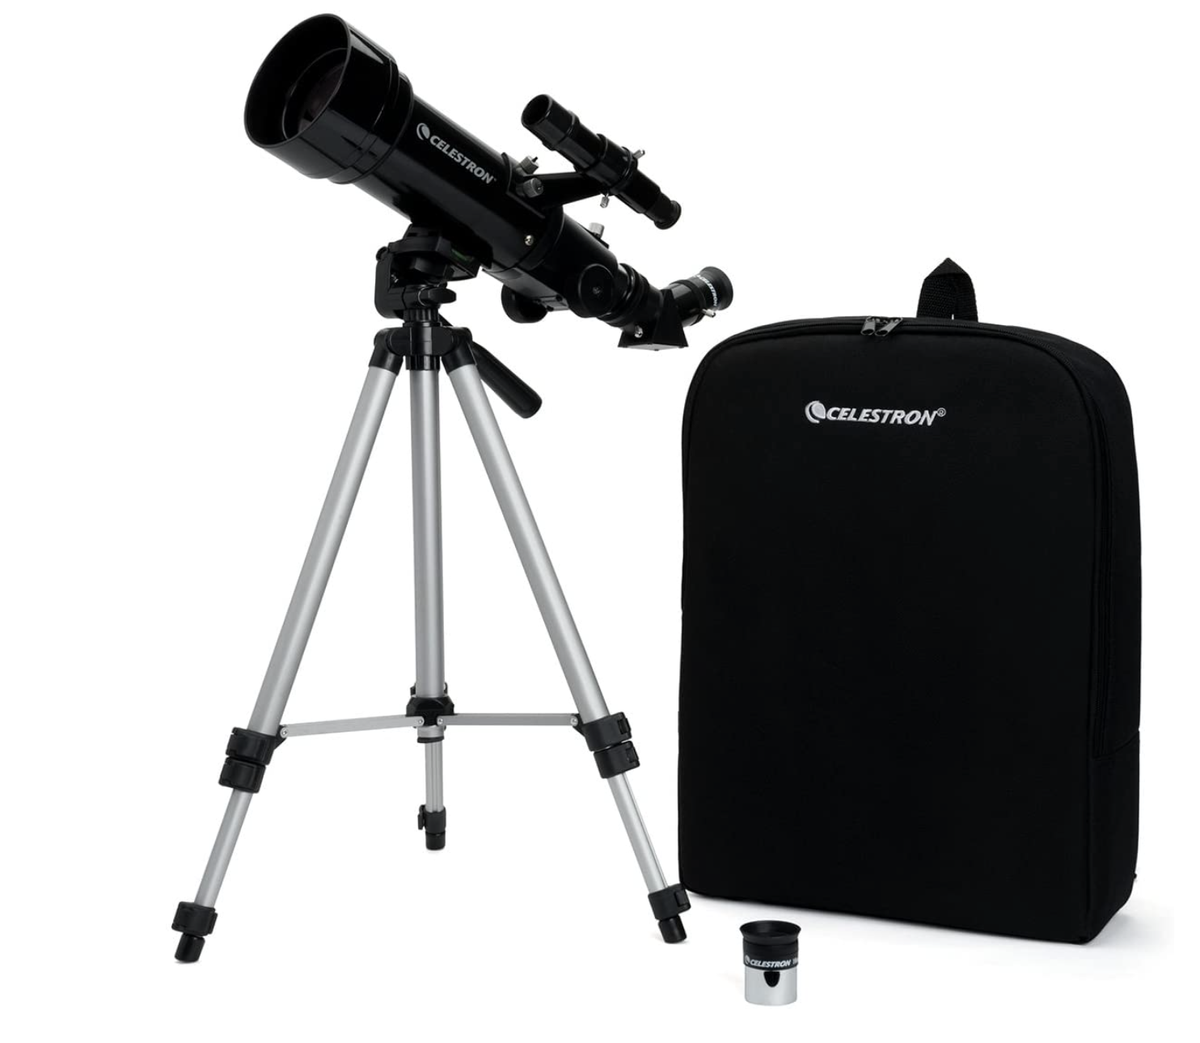 Black Friday Telescope & Camera Deals 2020 [UPDATED DAILY]